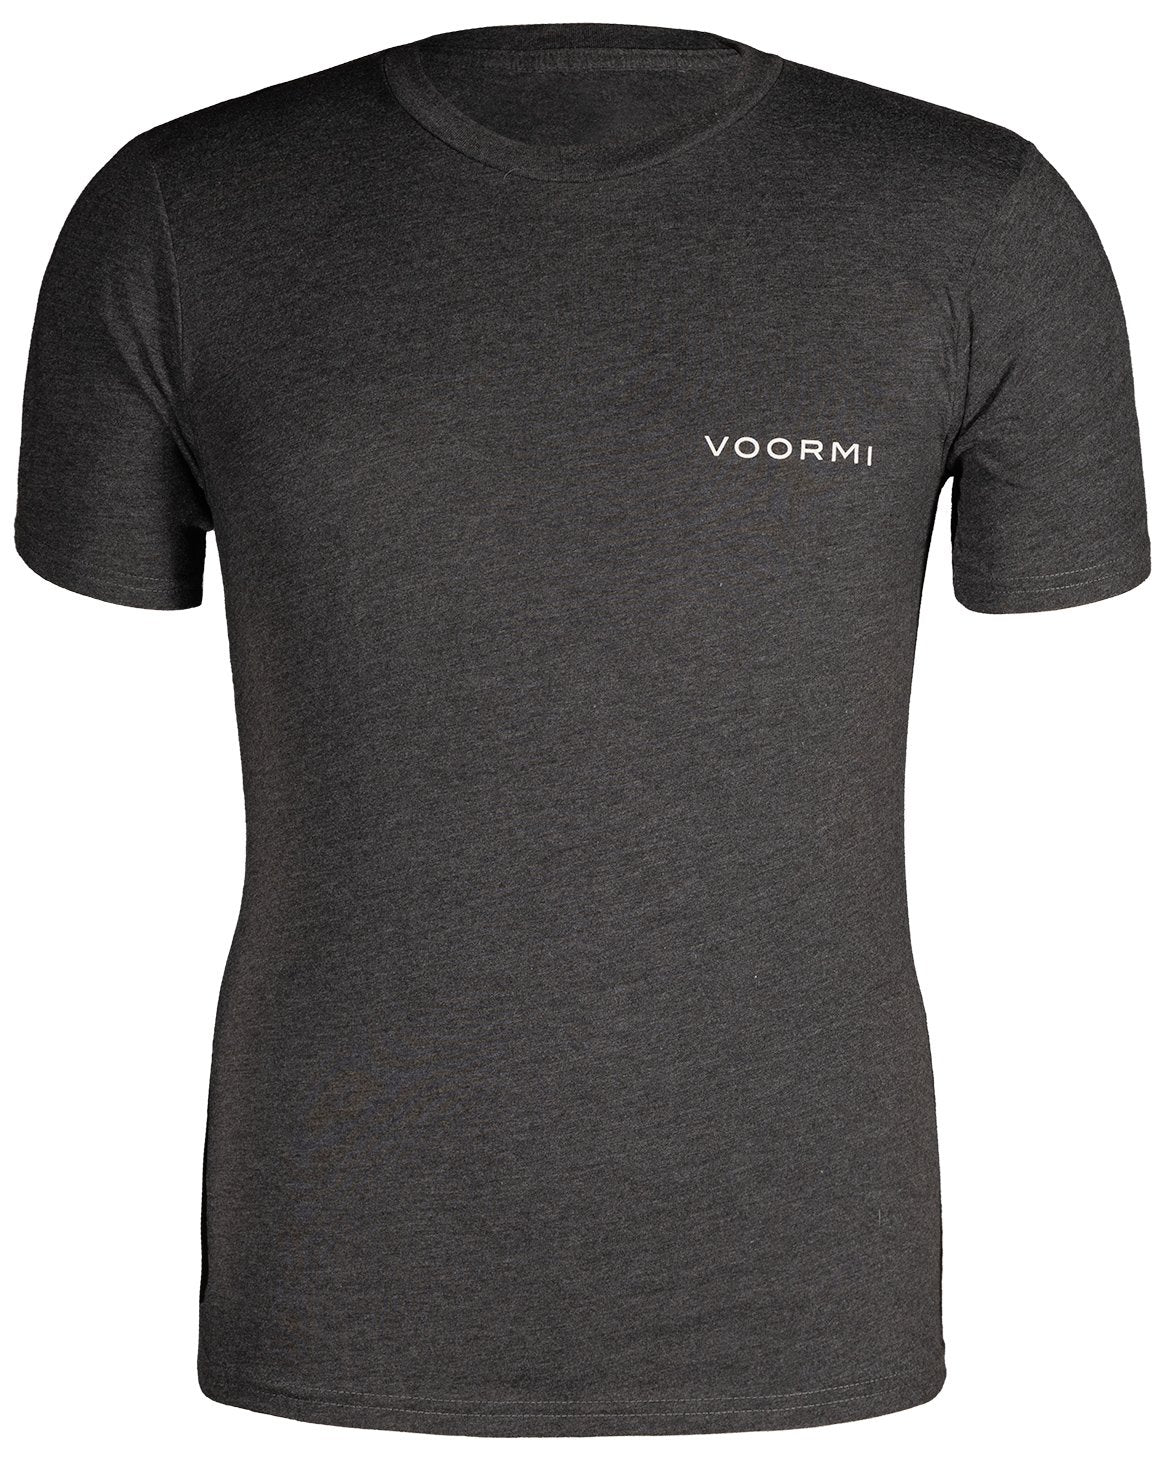 MEN'S SHORT SLEEVE GRAPHIC TEE - LINED LOGO by VOORMI